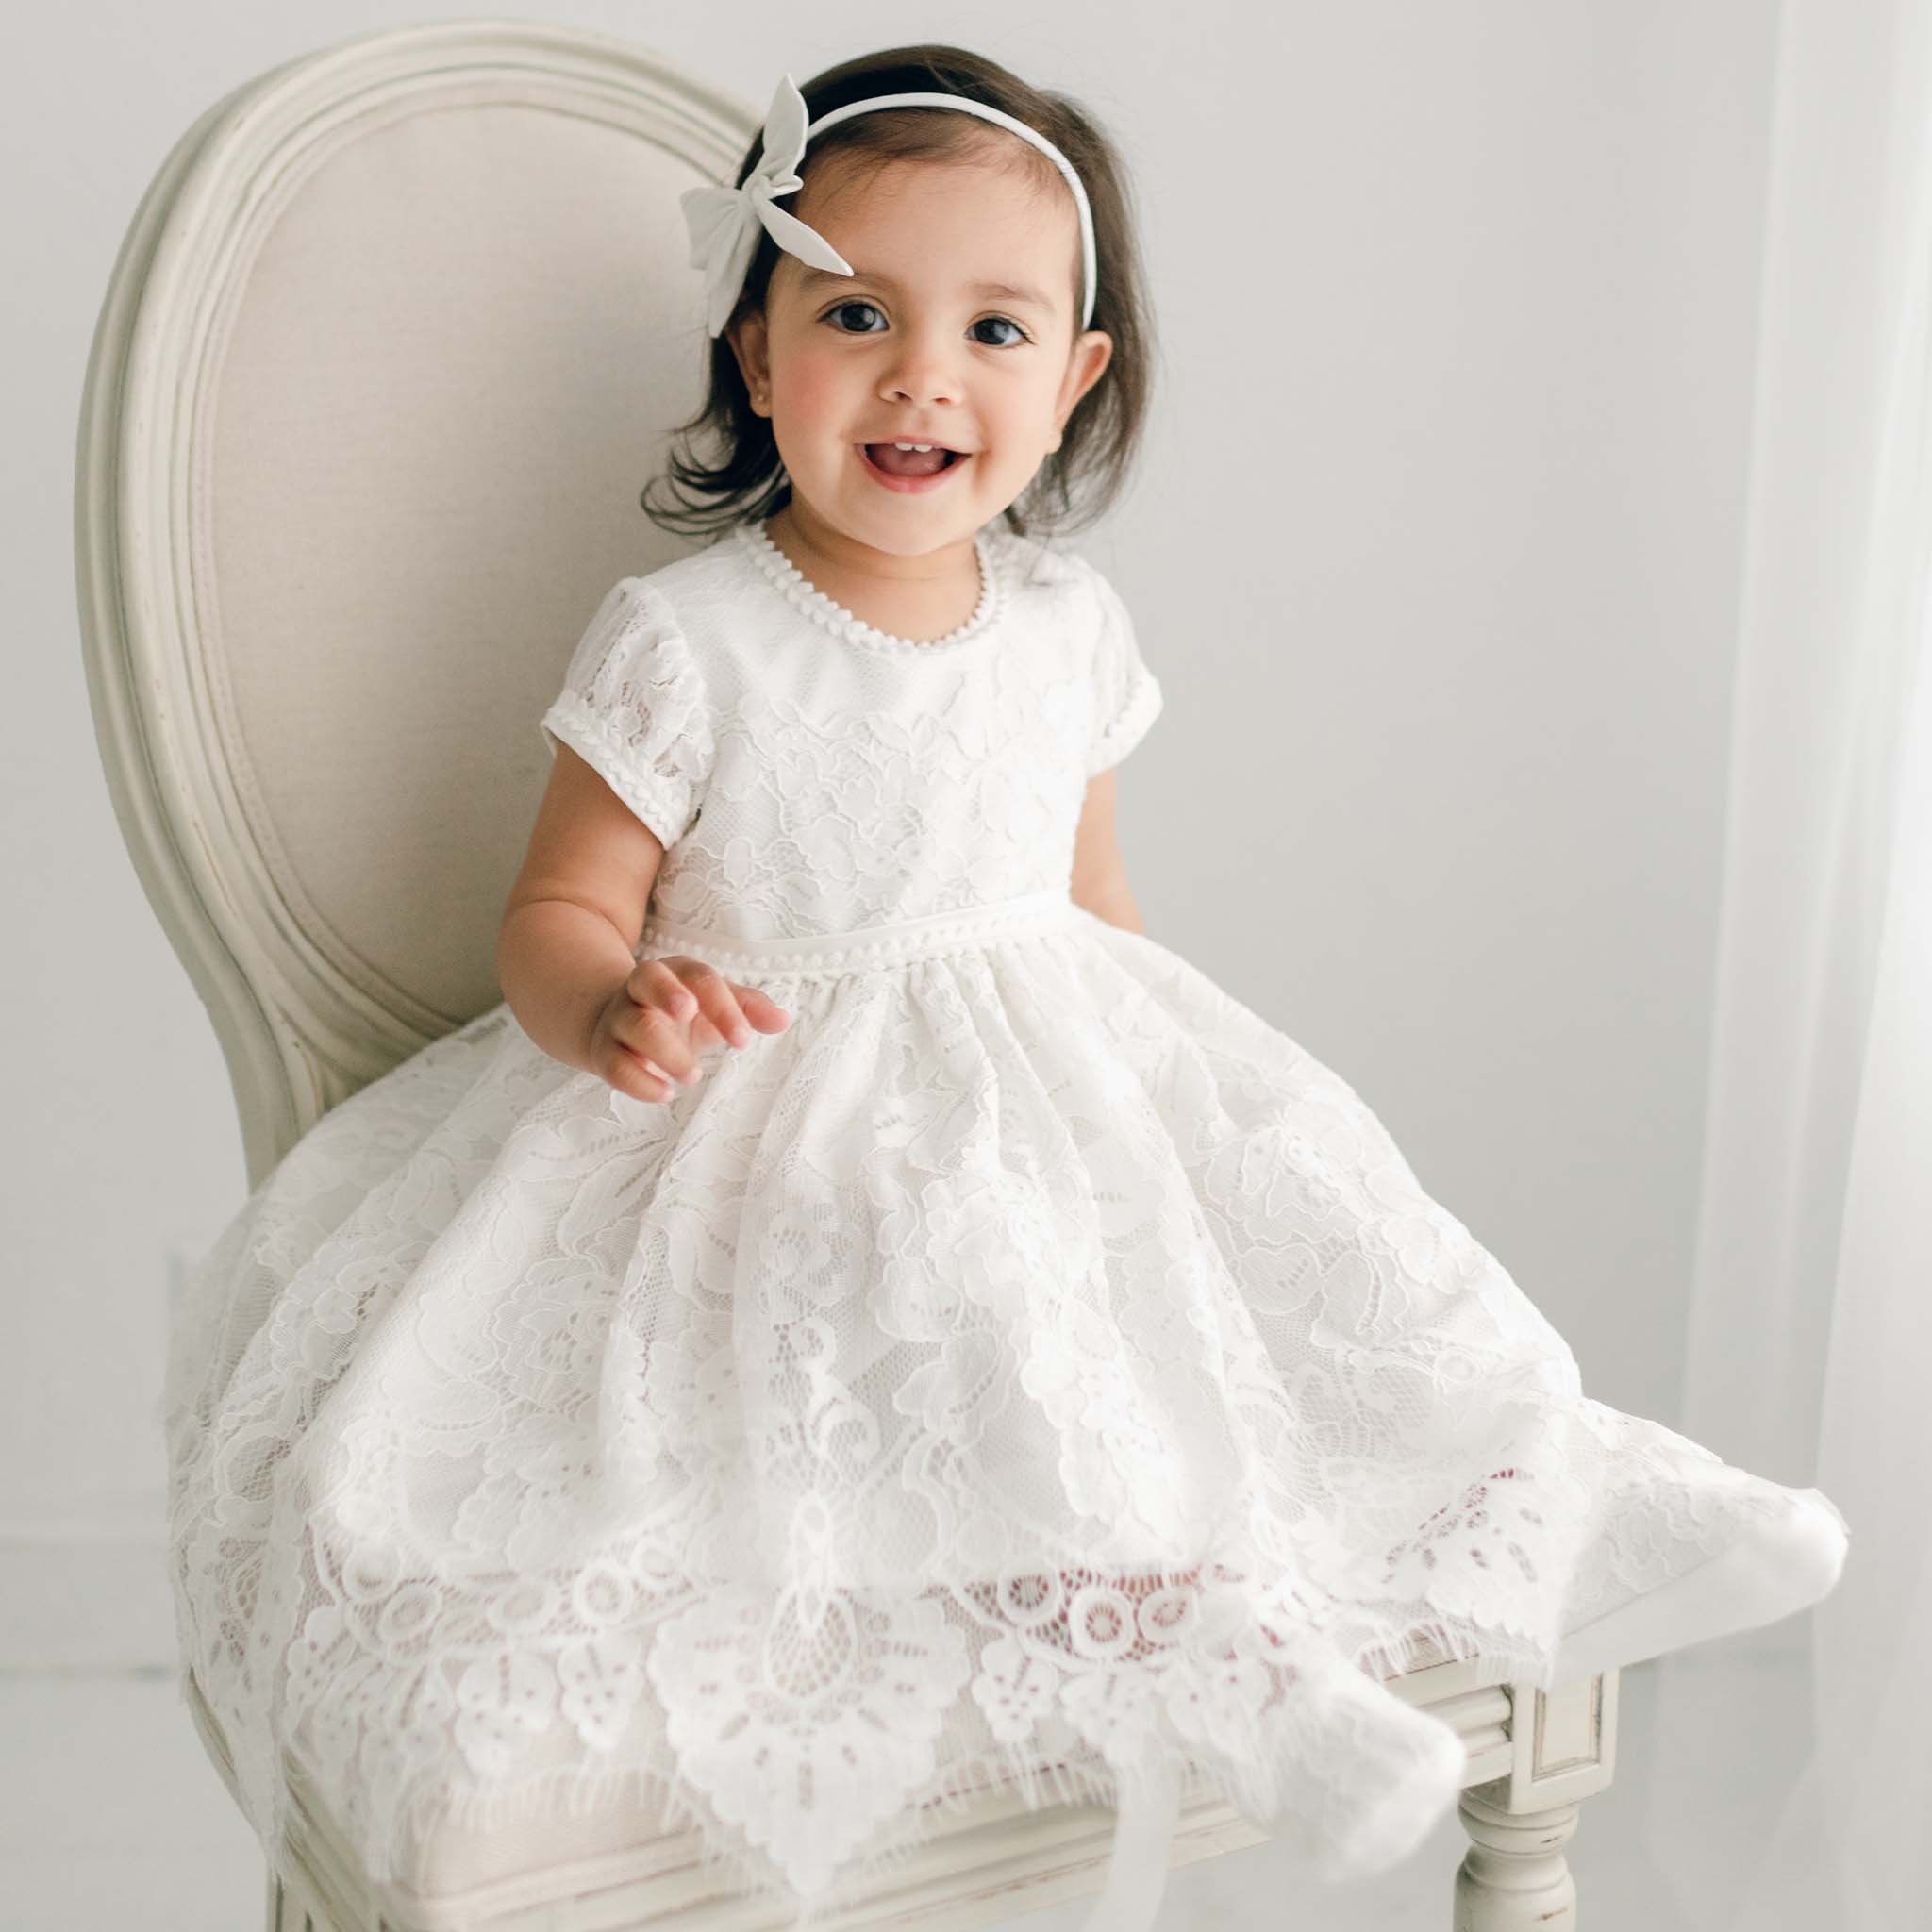 Mother Daughter Matching Dress, off White Dress, Lace Christening